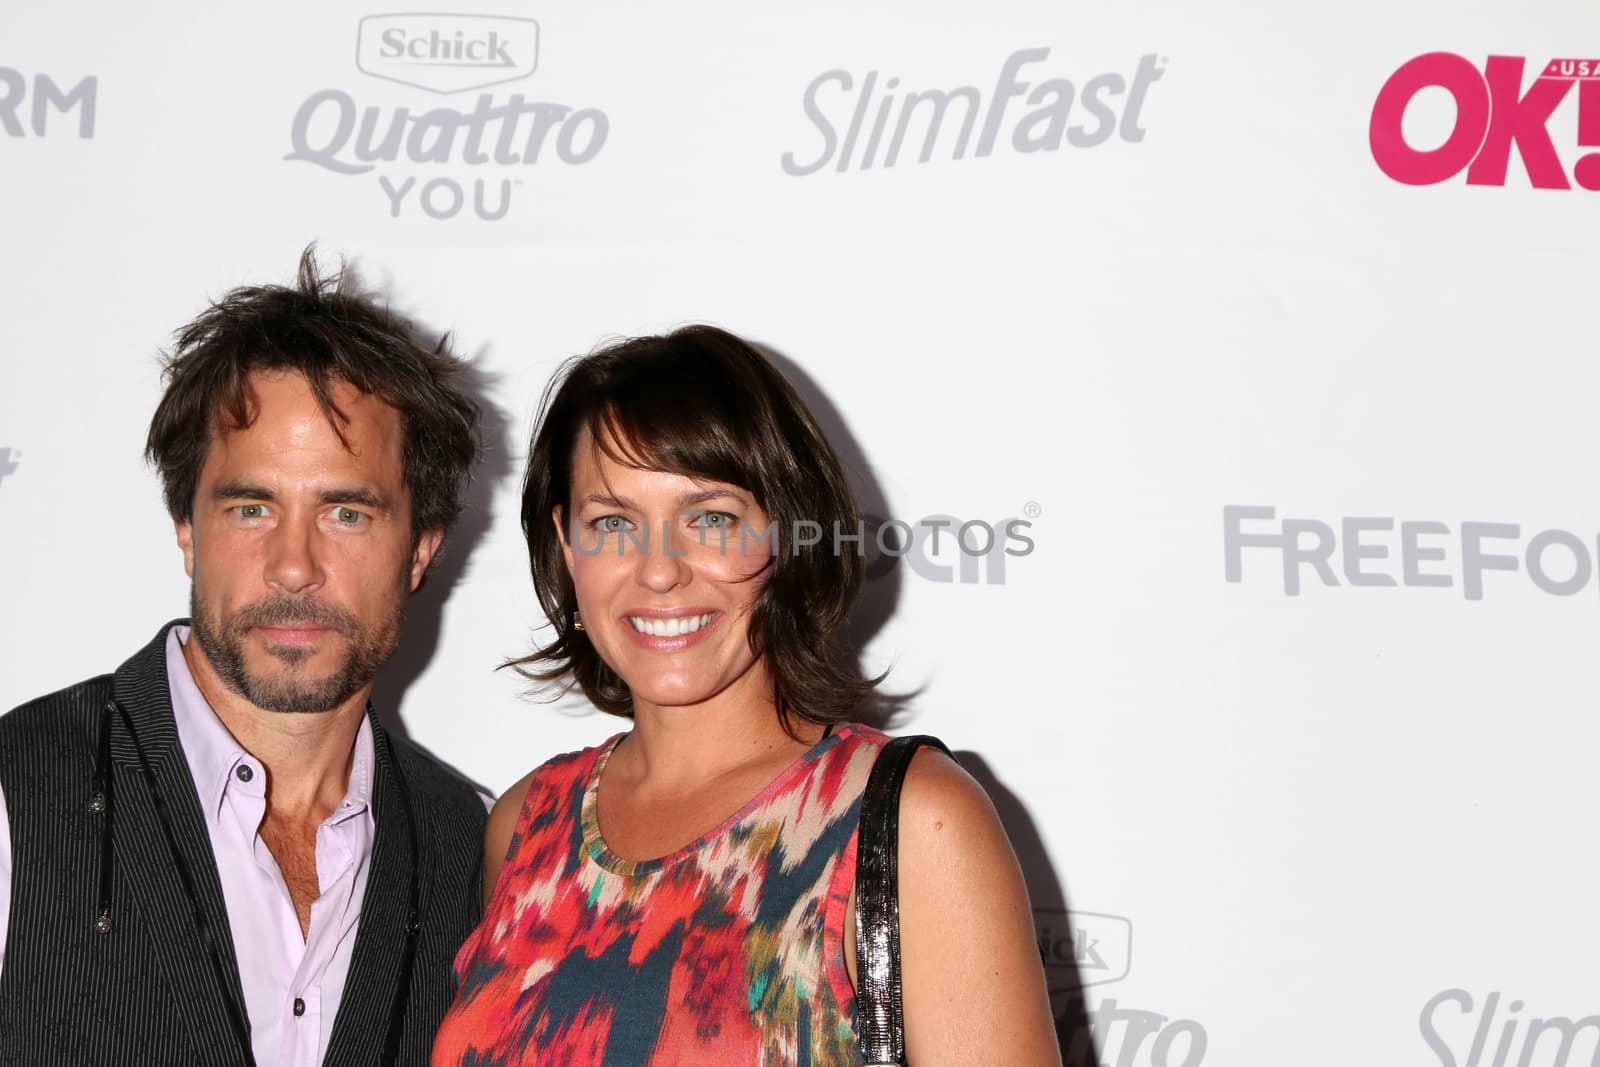 Shawn Christian, Arianne Zucker
at the OK! Magazine Summer Kick-Off Party, W Hollywood Hotel, Hollywood, CA 05-17-17/ImageCollect by ImageCollect